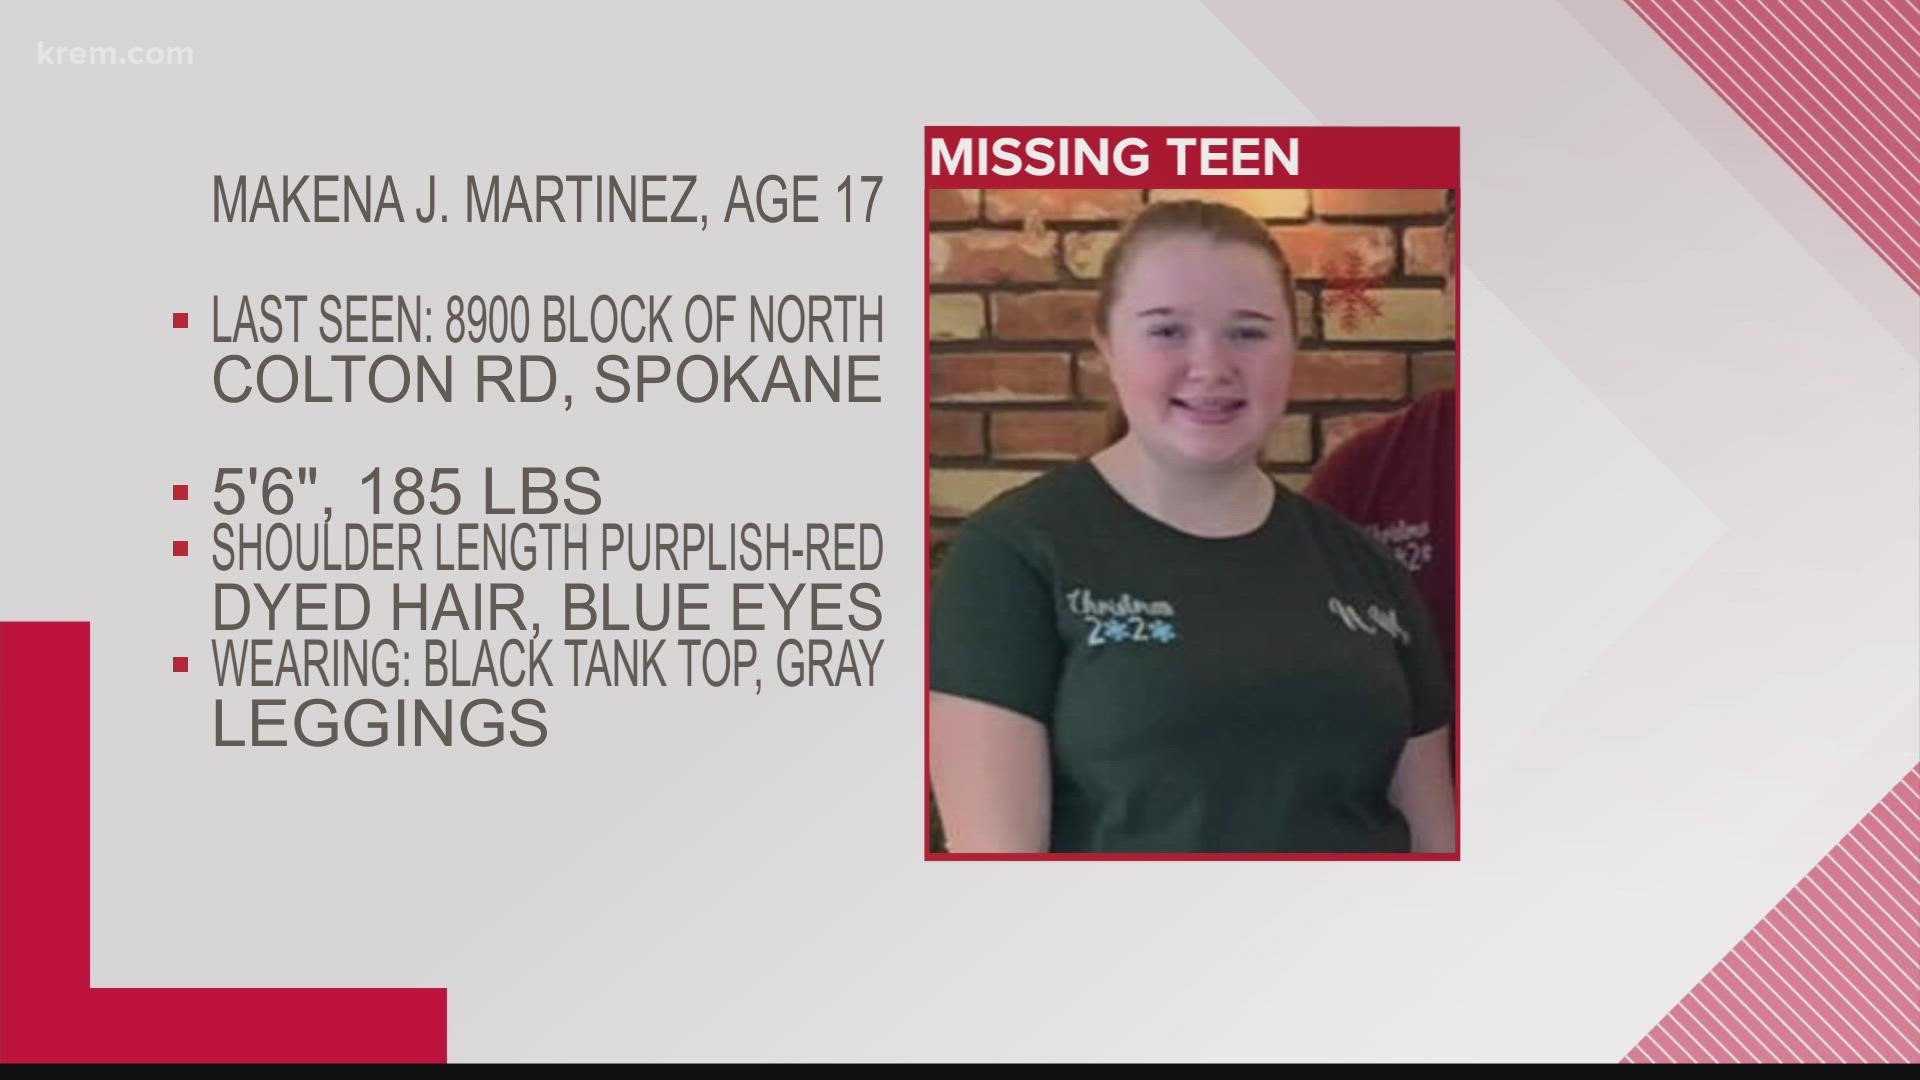 Spokane Police are asking for the public's help finding 17-year-old Makena J. Martinez last seen on Sunday.